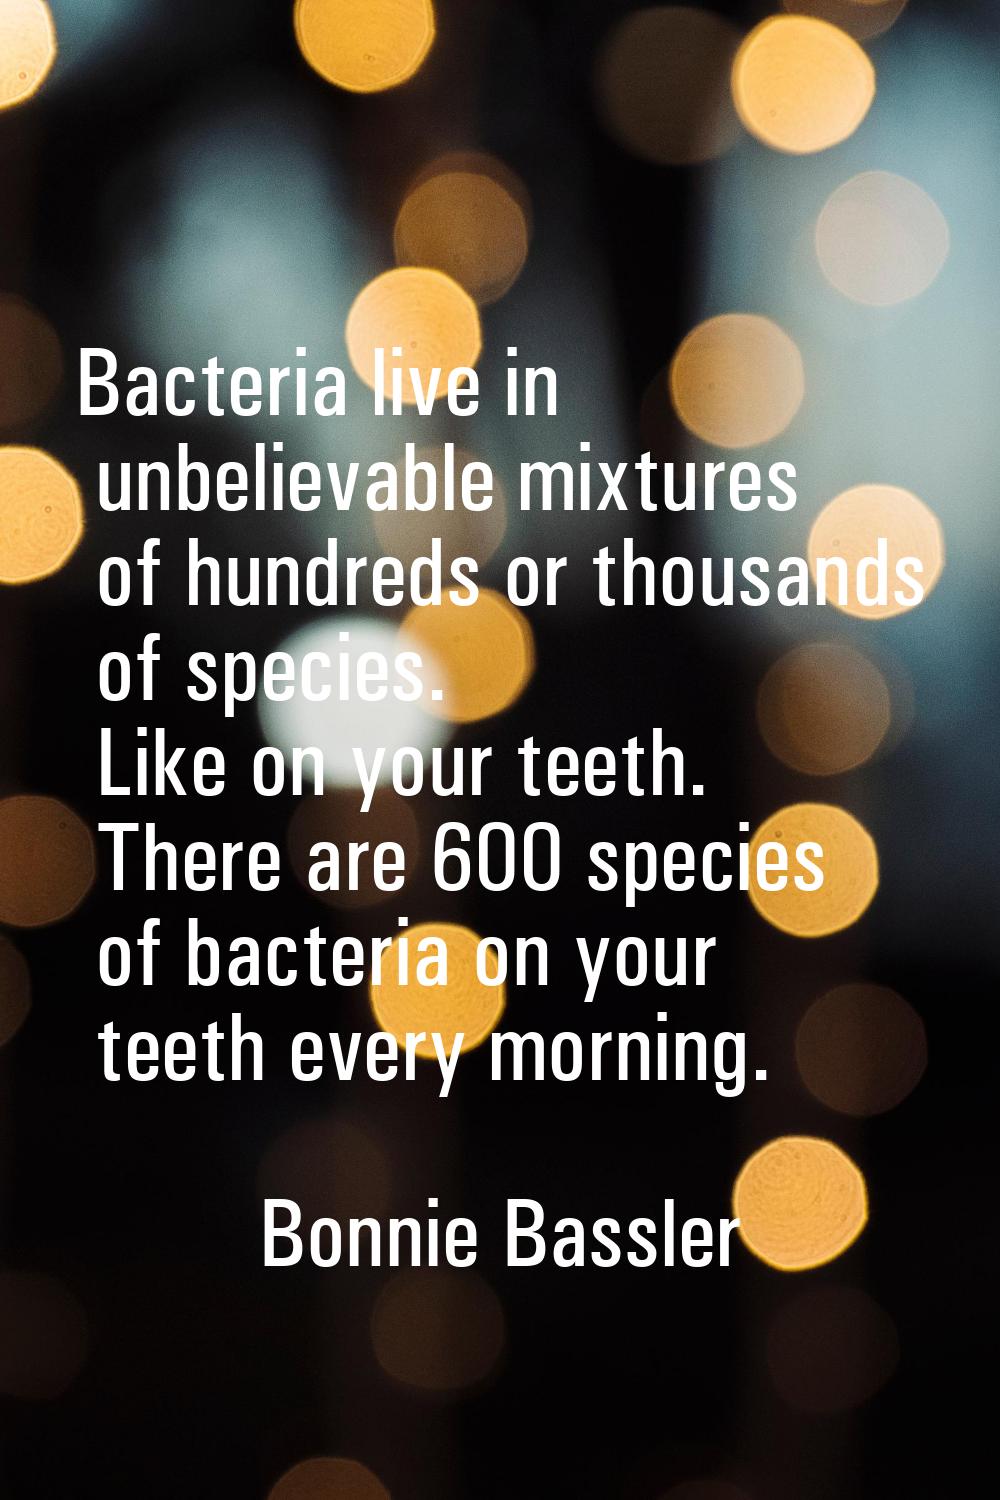 Bacteria live in unbelievable mixtures of hundreds or thousands of species. Like on your teeth. The